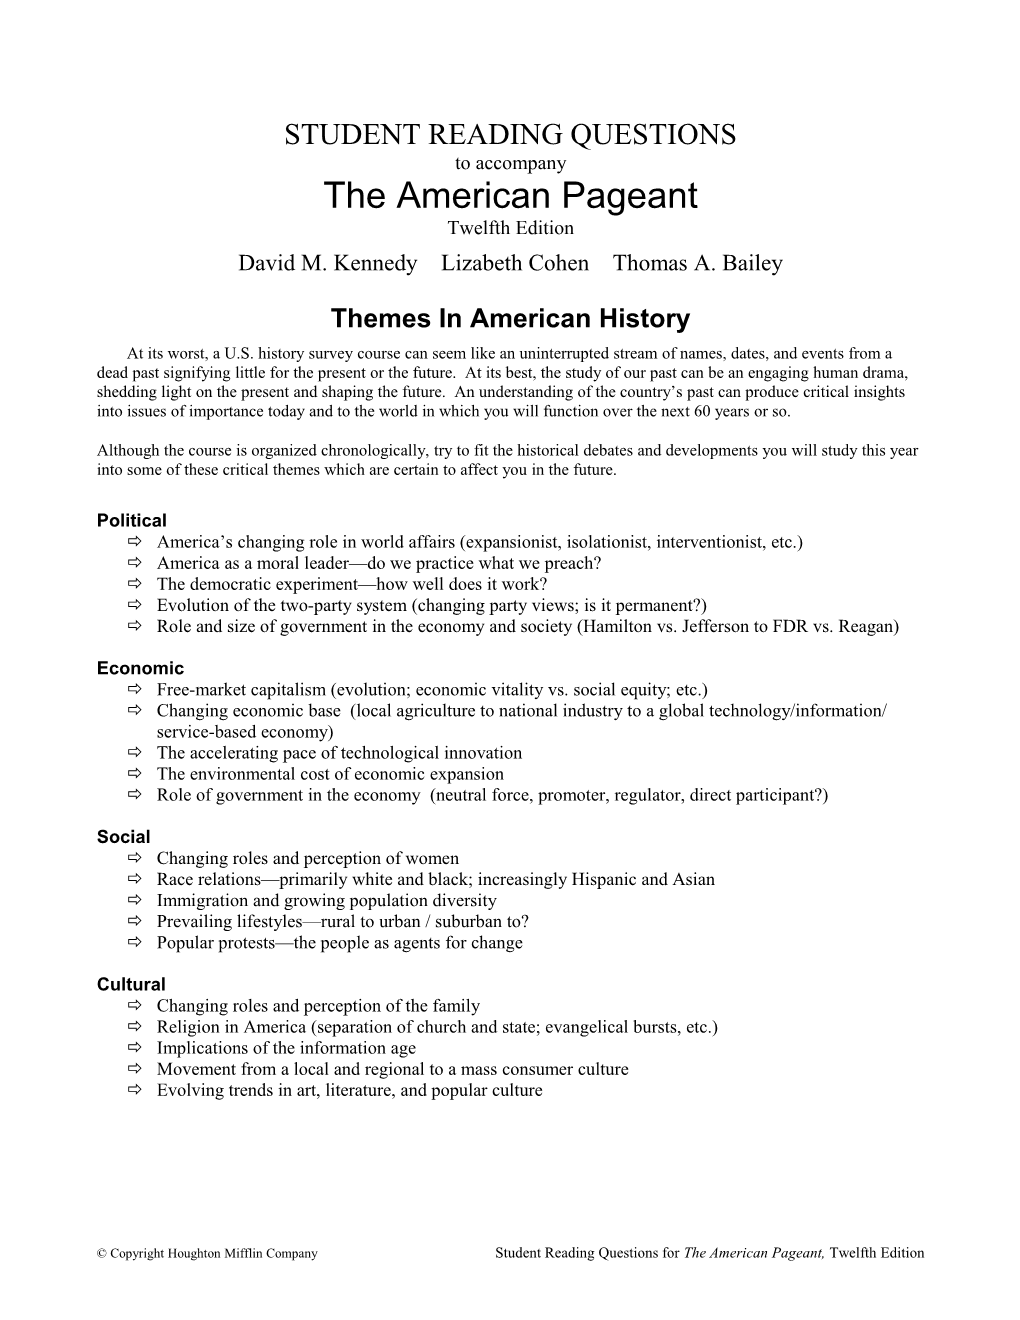 Am. Pageant Reading Questions, Ch. 1-10